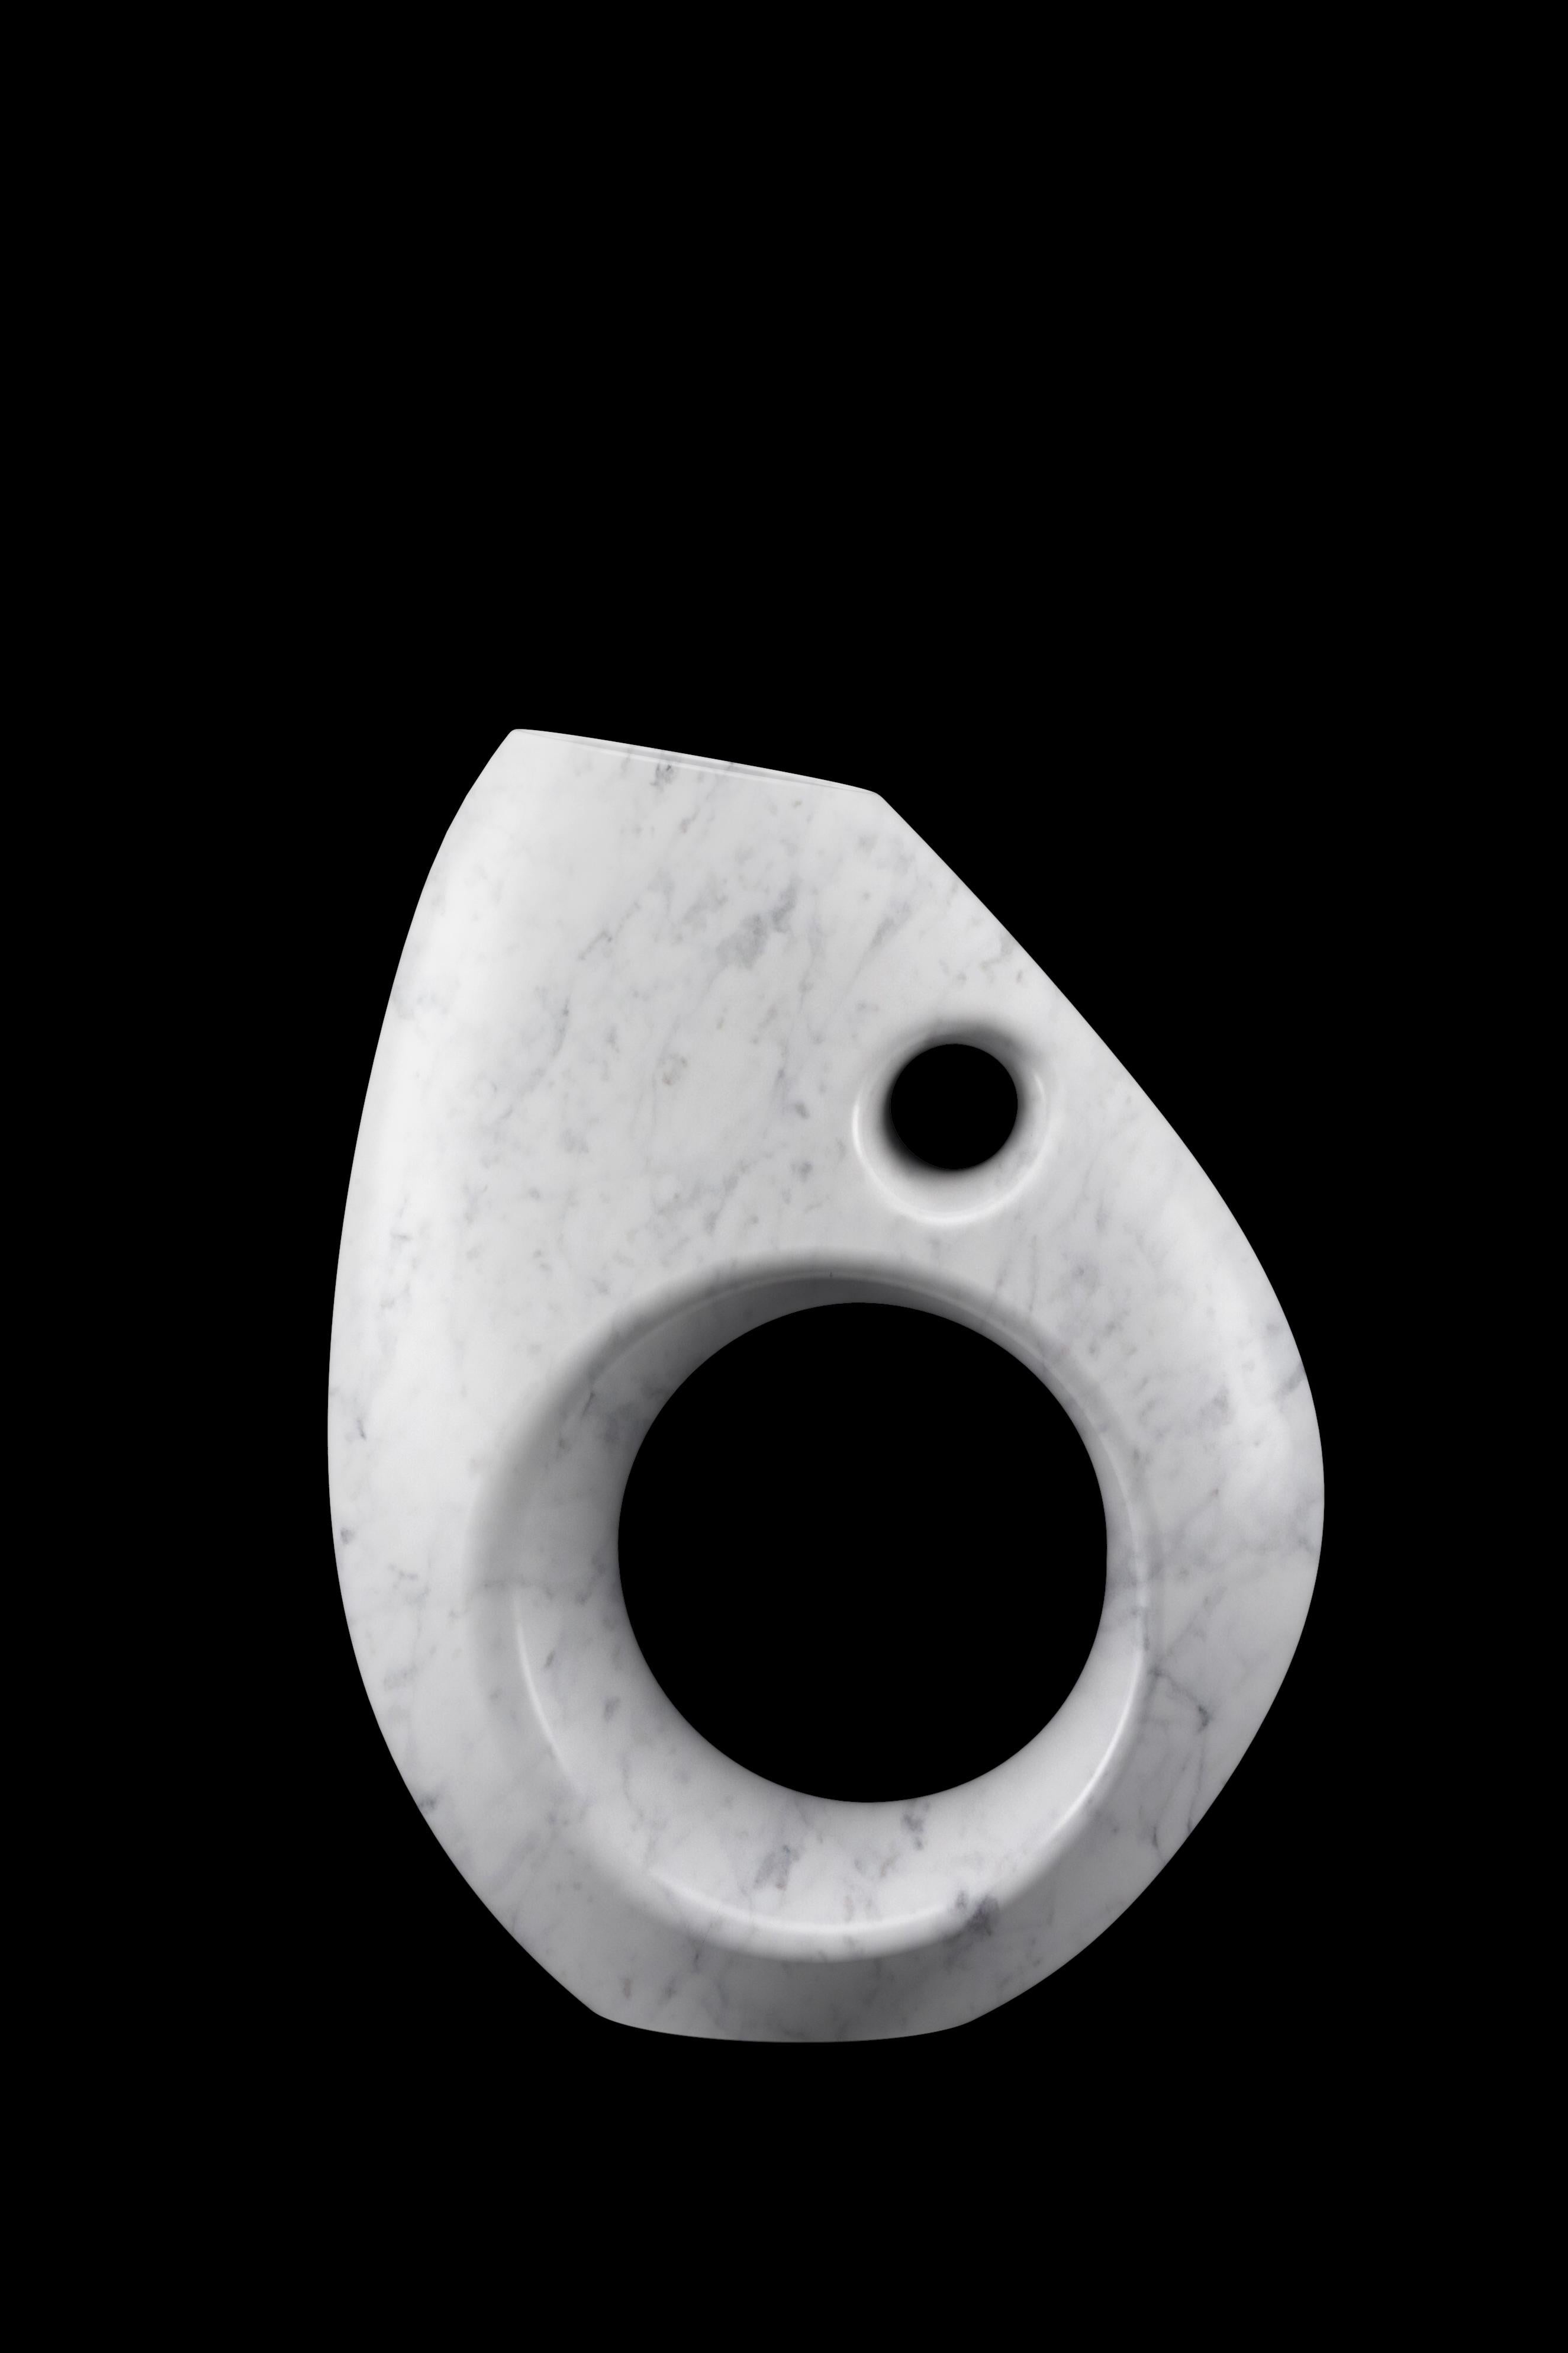 Important sculptural vase carved by hand from a solid block of white Carrara marble. 

Vase dimension: L 39 W 16.5, H 50 cm. Available in different marbles, onyx and quartzite.  

Limited edition of 35.

Each vase is hand signed and numbered by the